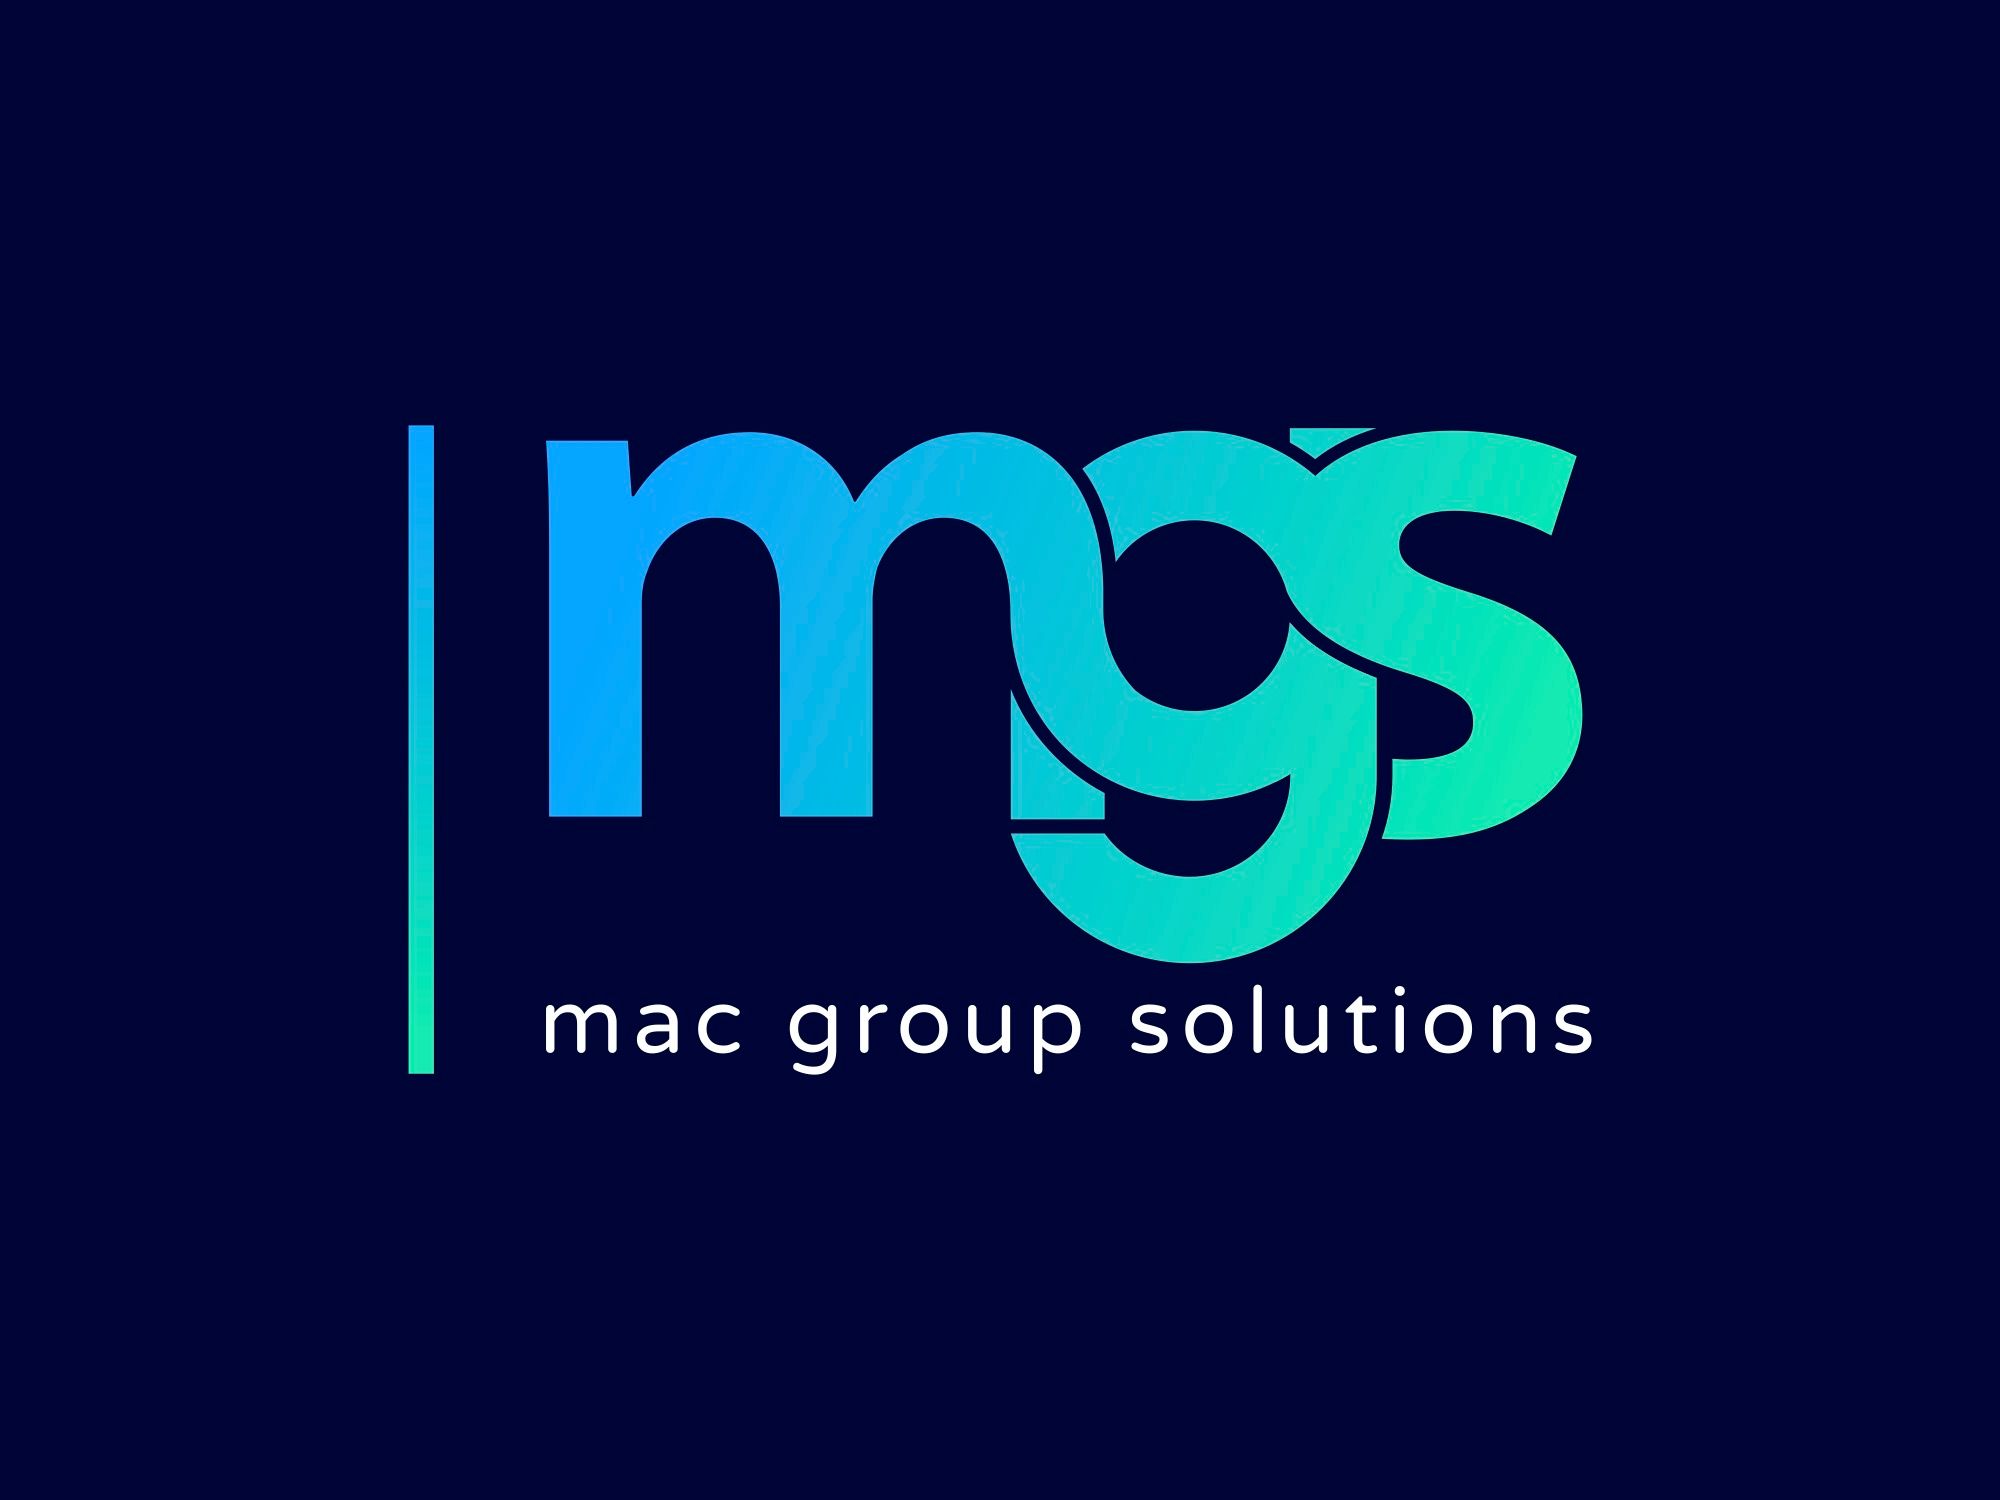 MGS - Mac Group Solutions